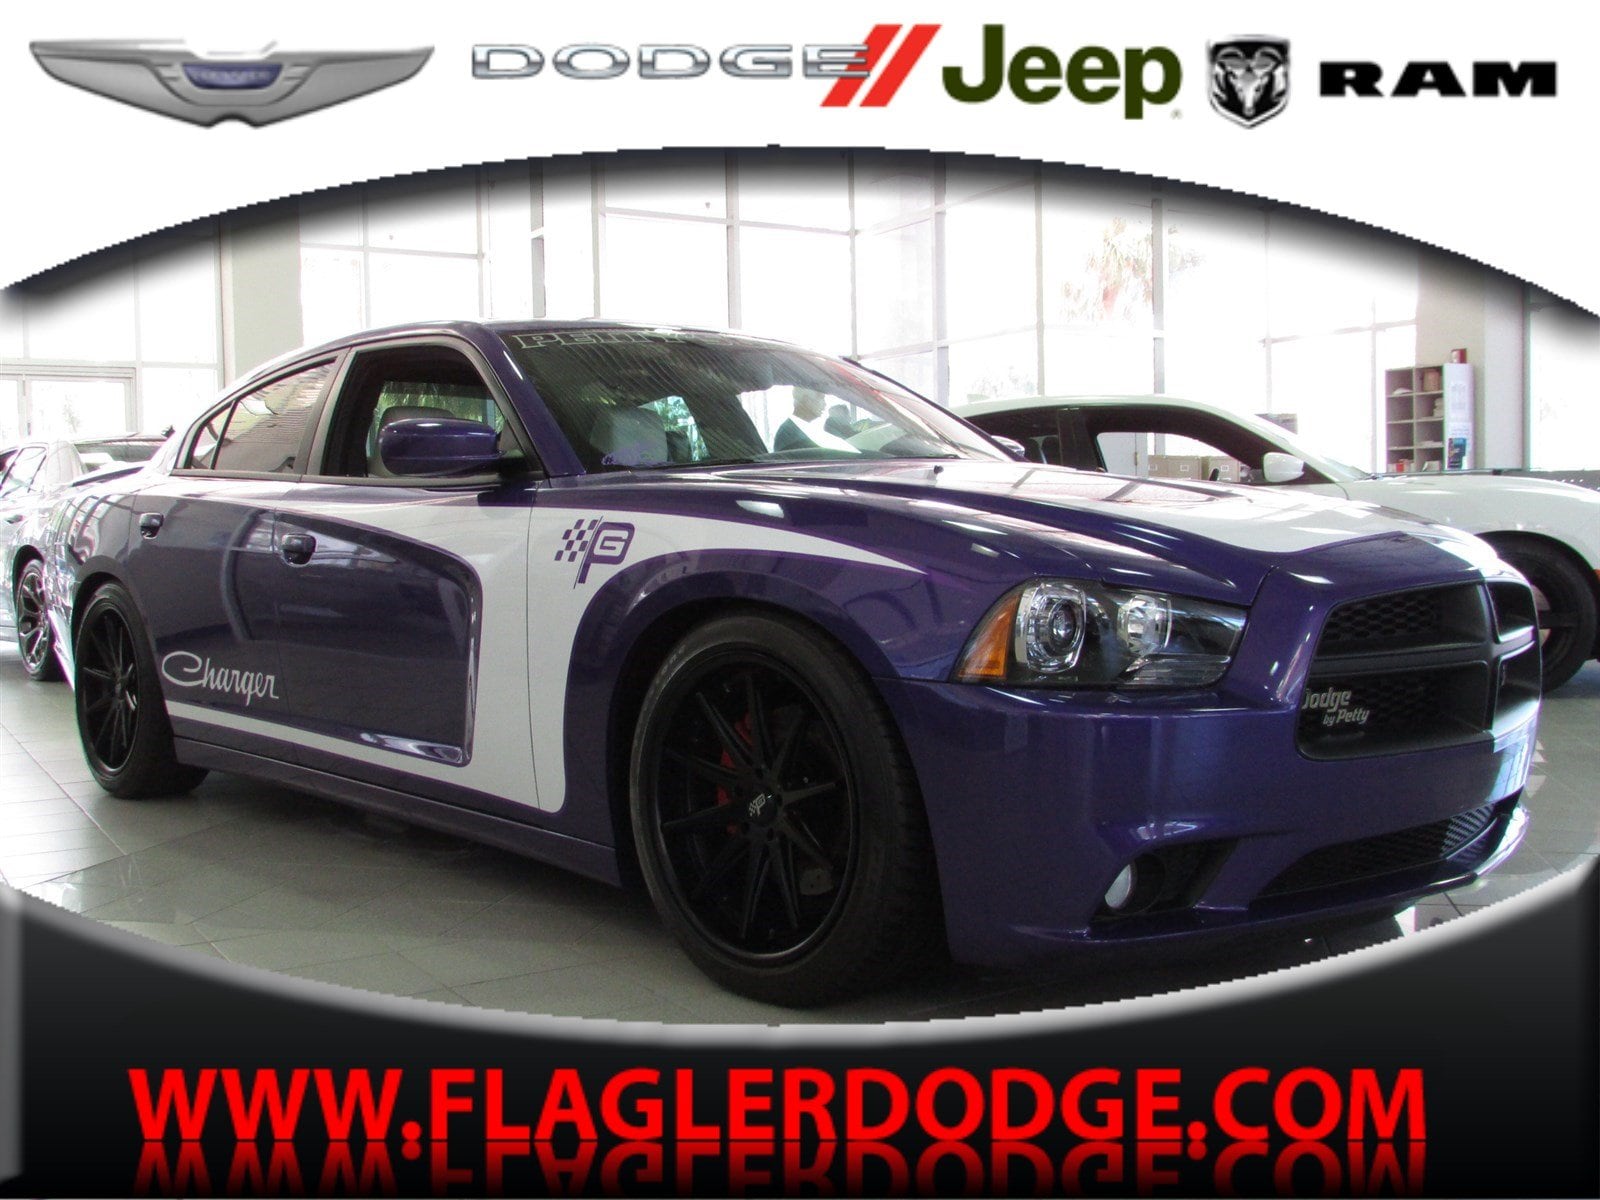 dodge charger rt